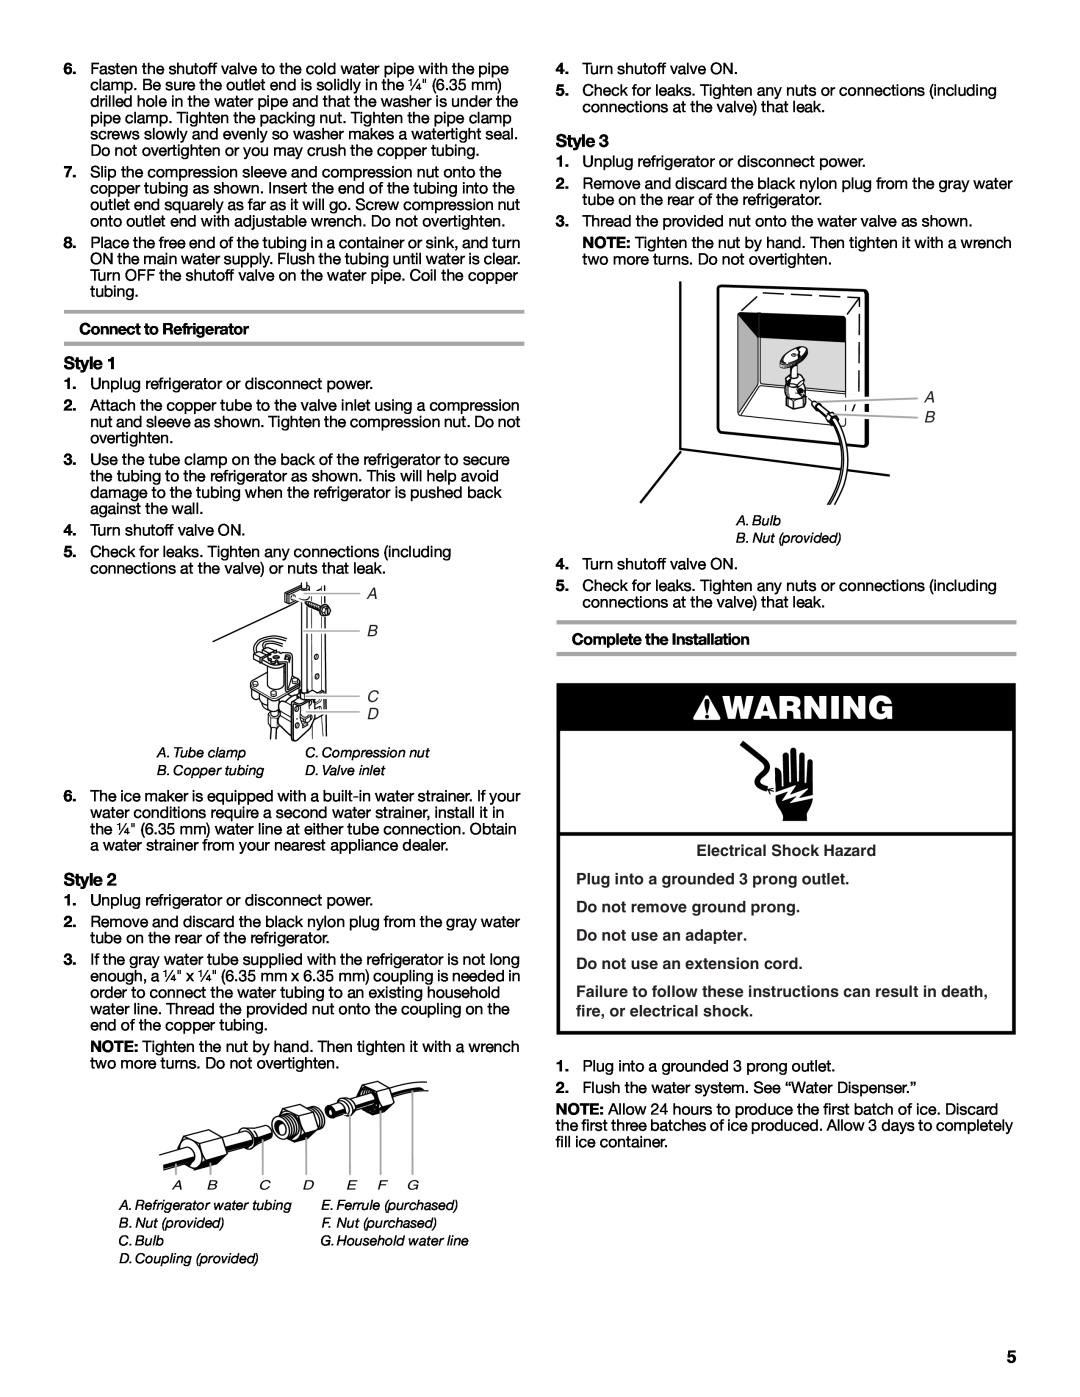 Whirlpool GR2SHWXPB02 warranty Style, Connect to Refrigerator, Complete the Installation, Do not use an extension cord 